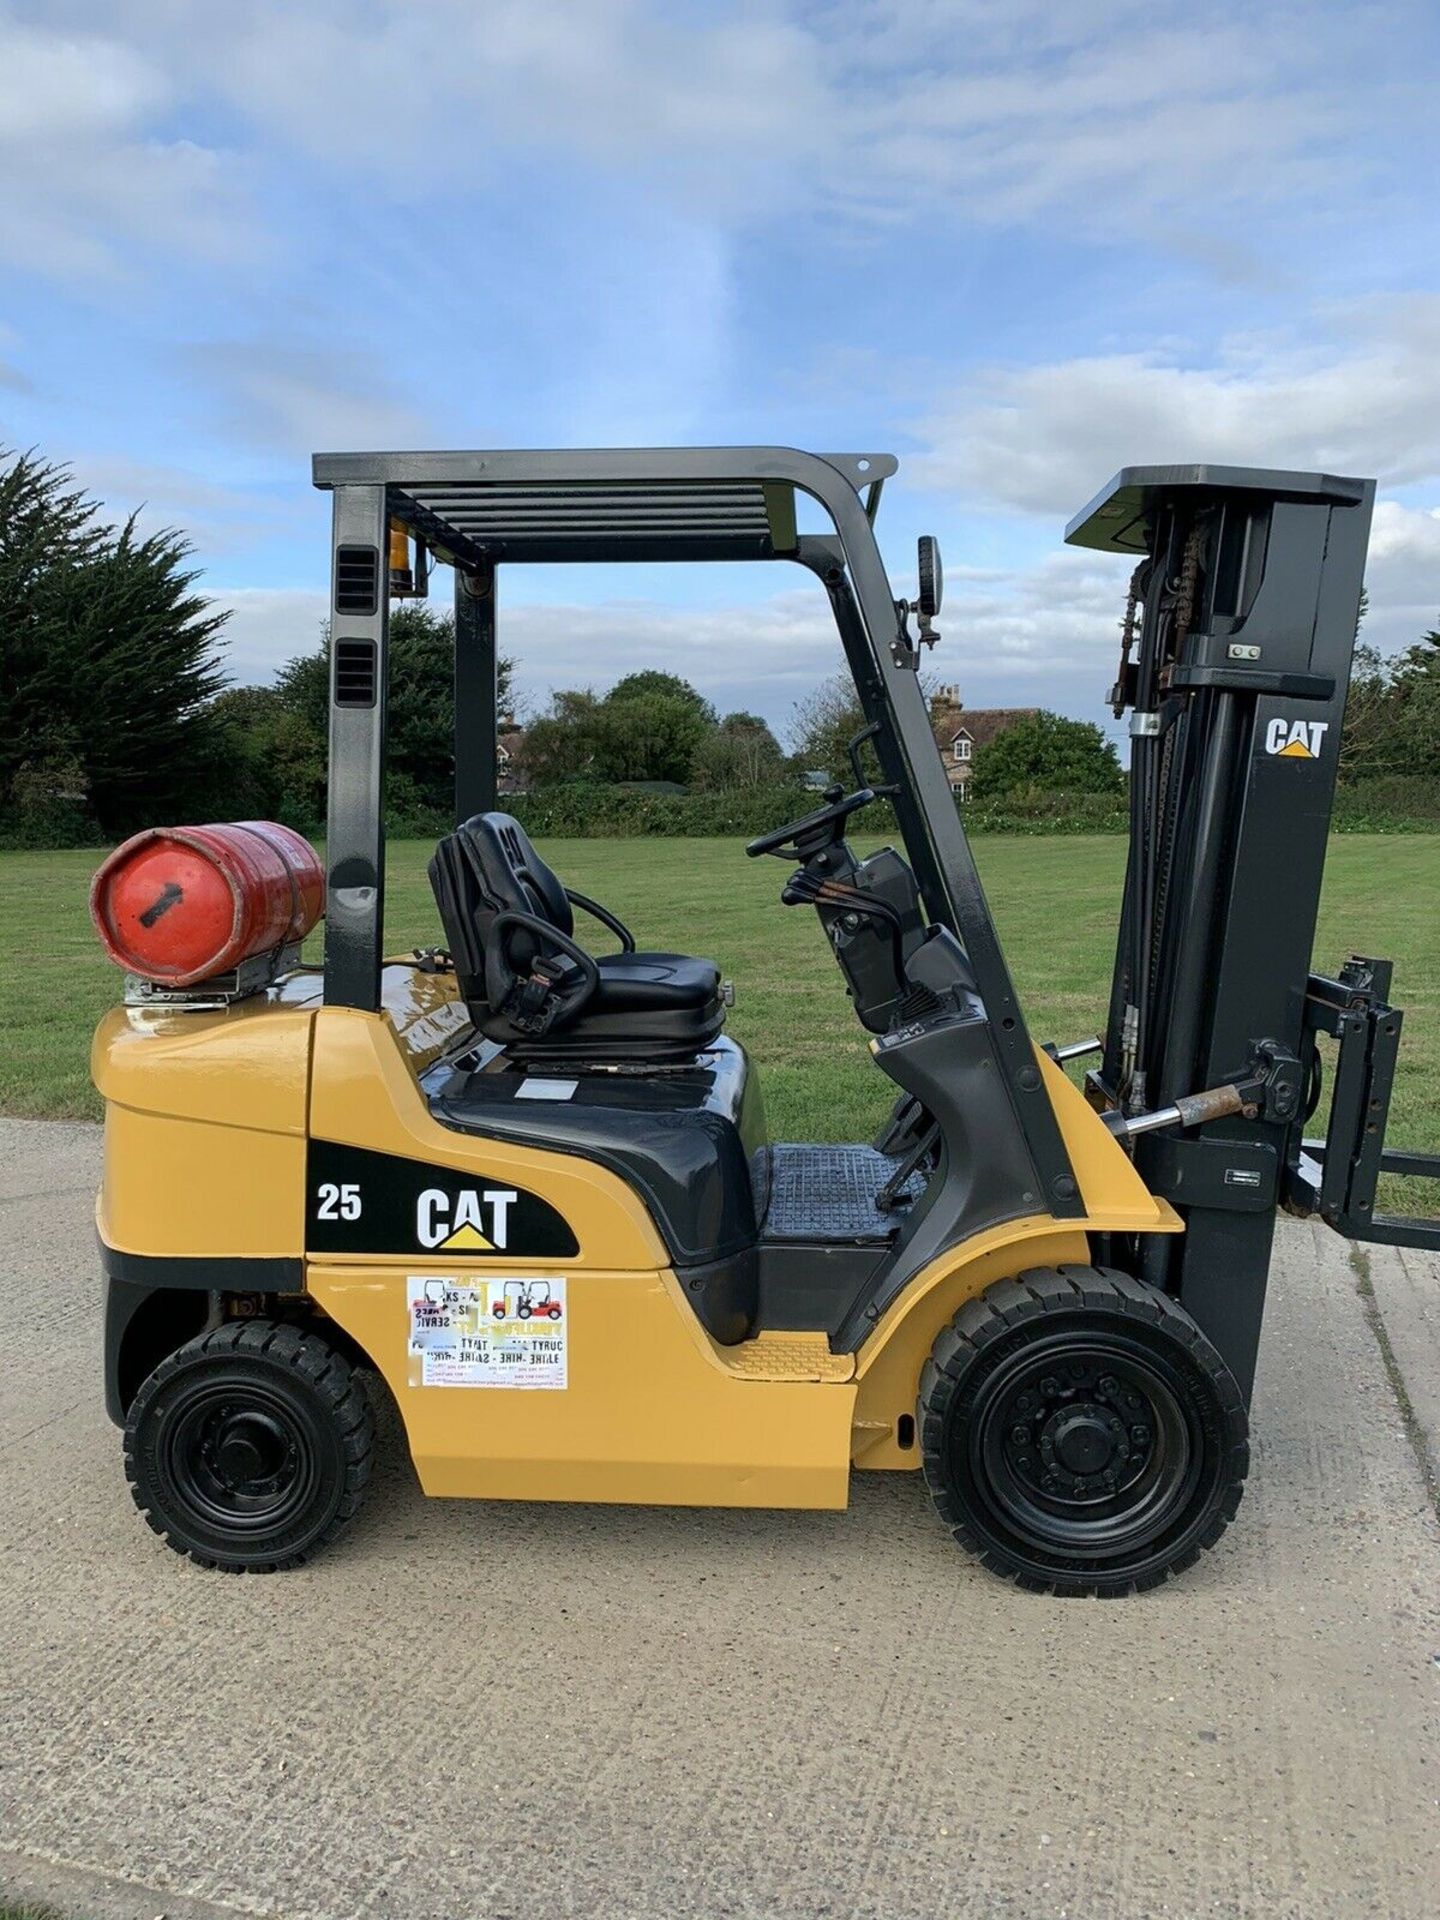 Caterpillar 2.5 Tonne Gas Container Spec Forklift - Image 5 of 6